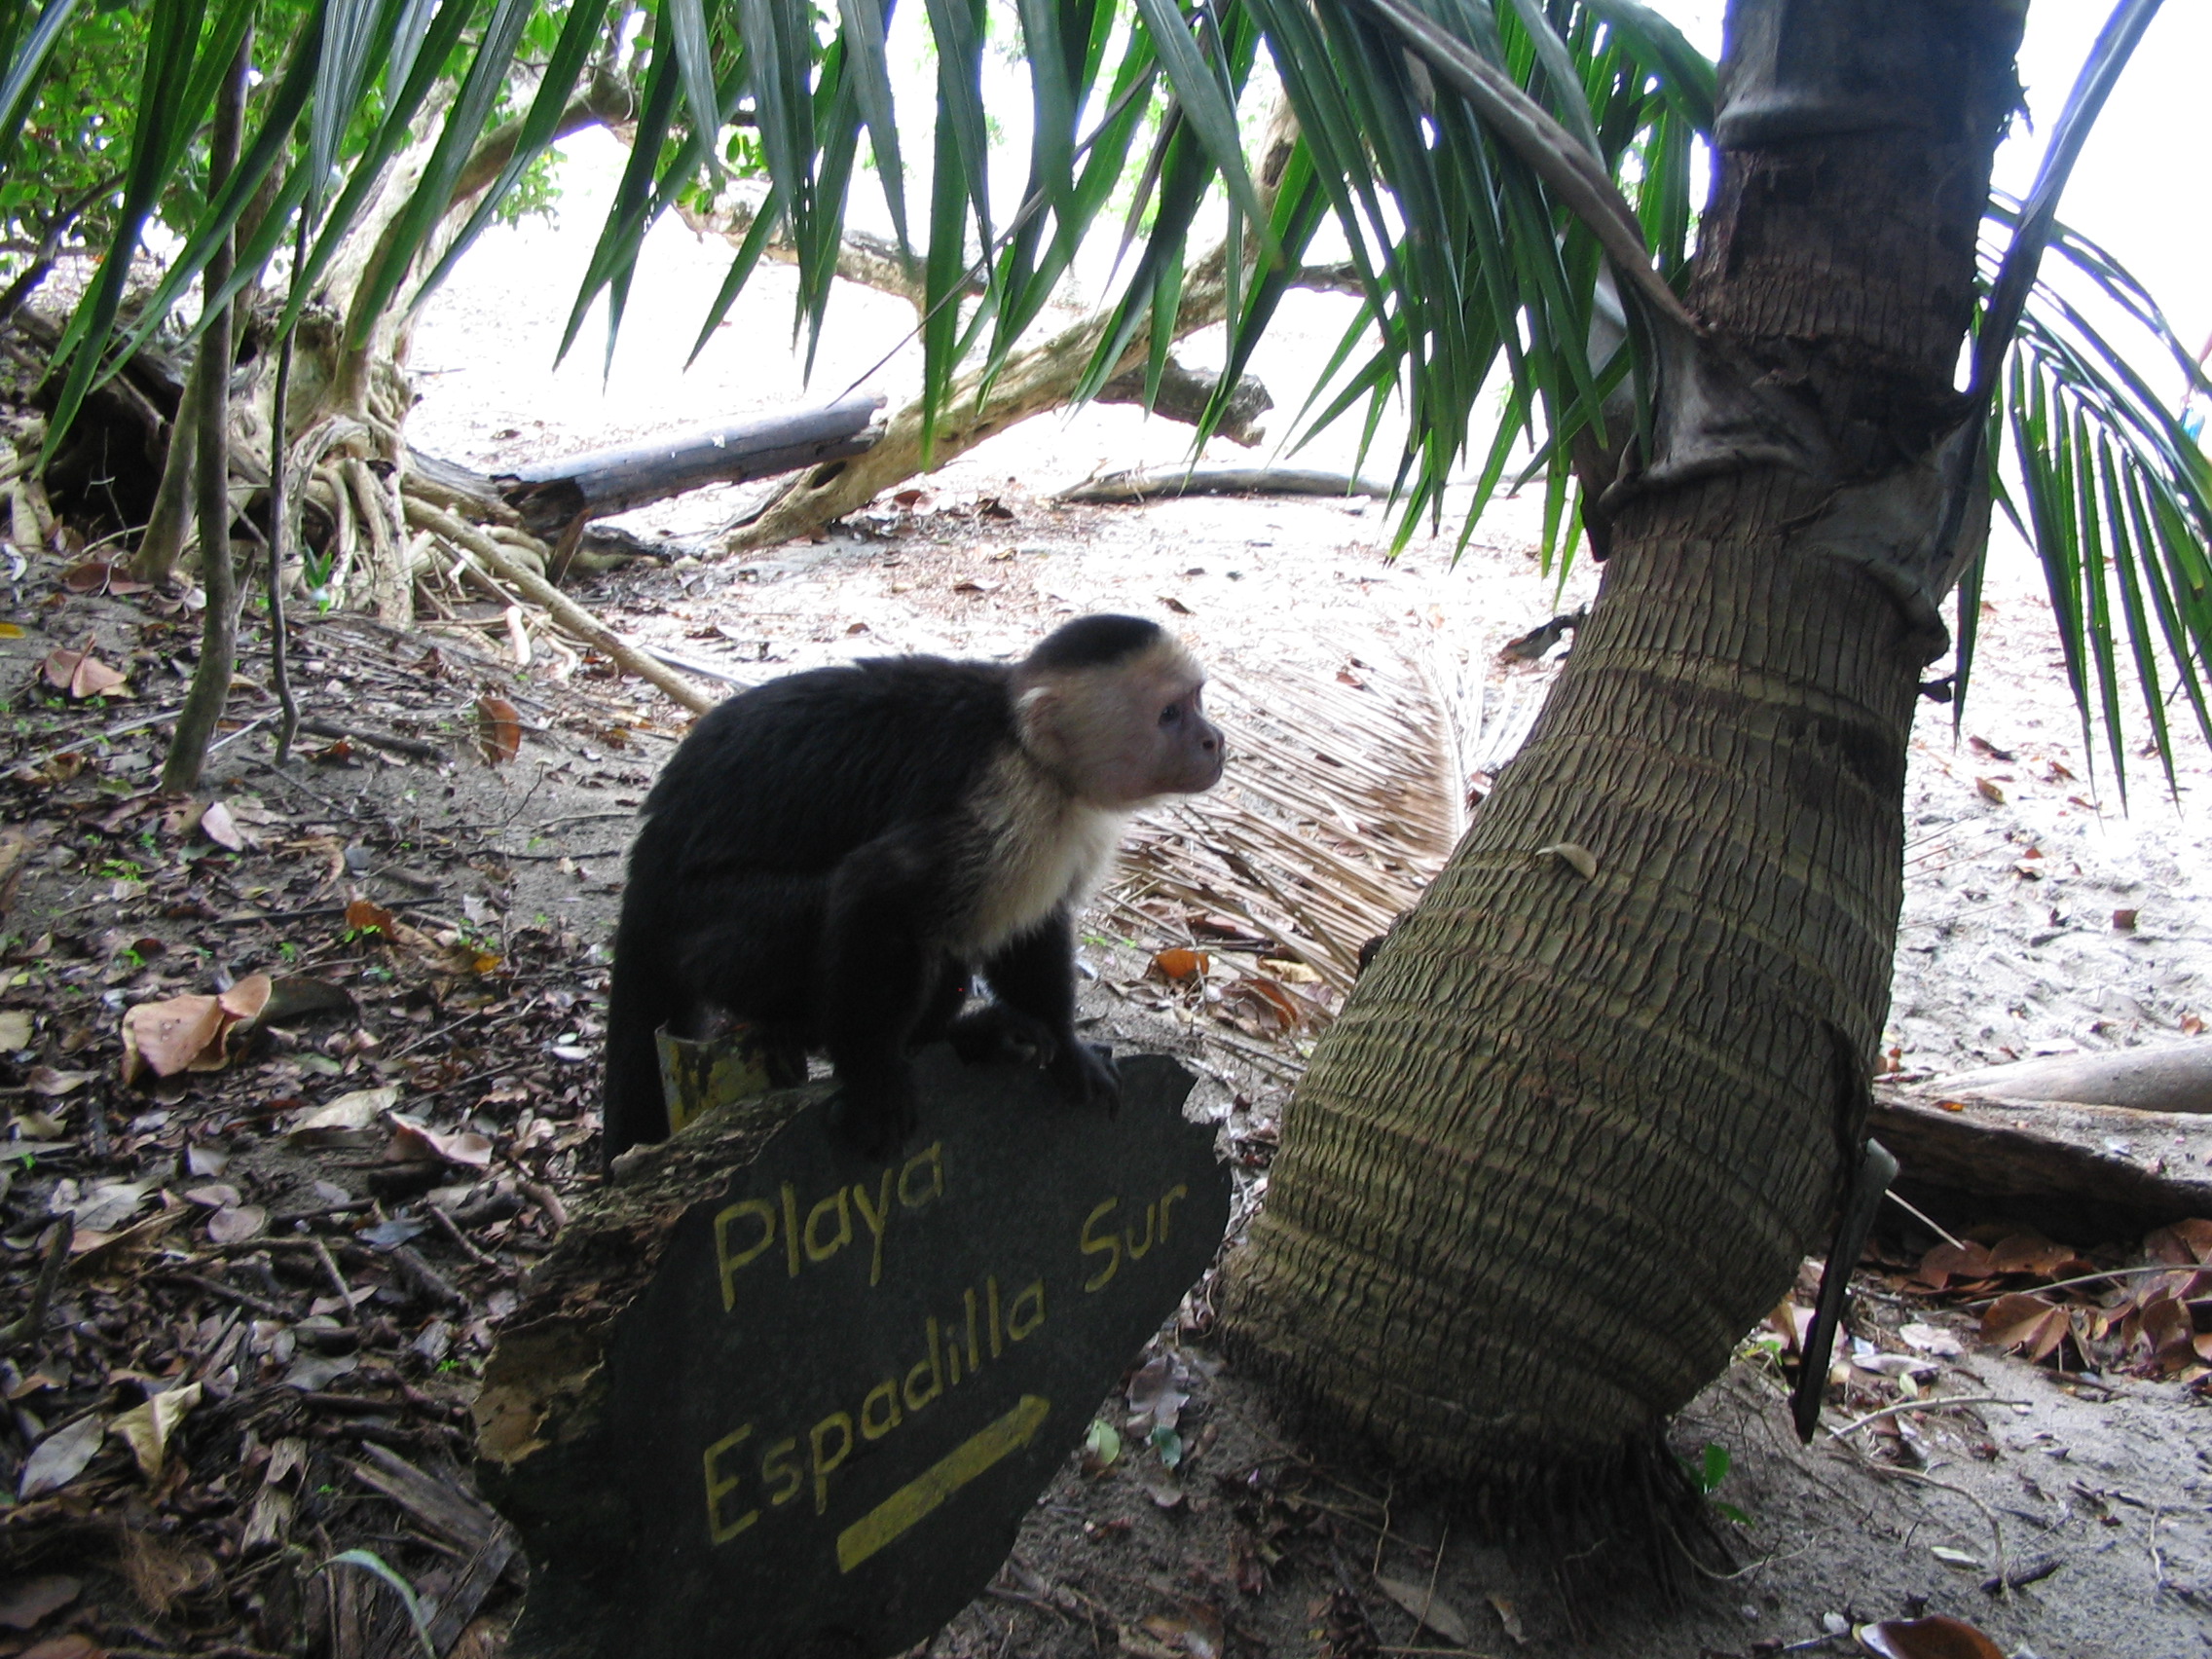 White-faced capuchin monkey on a park sign.